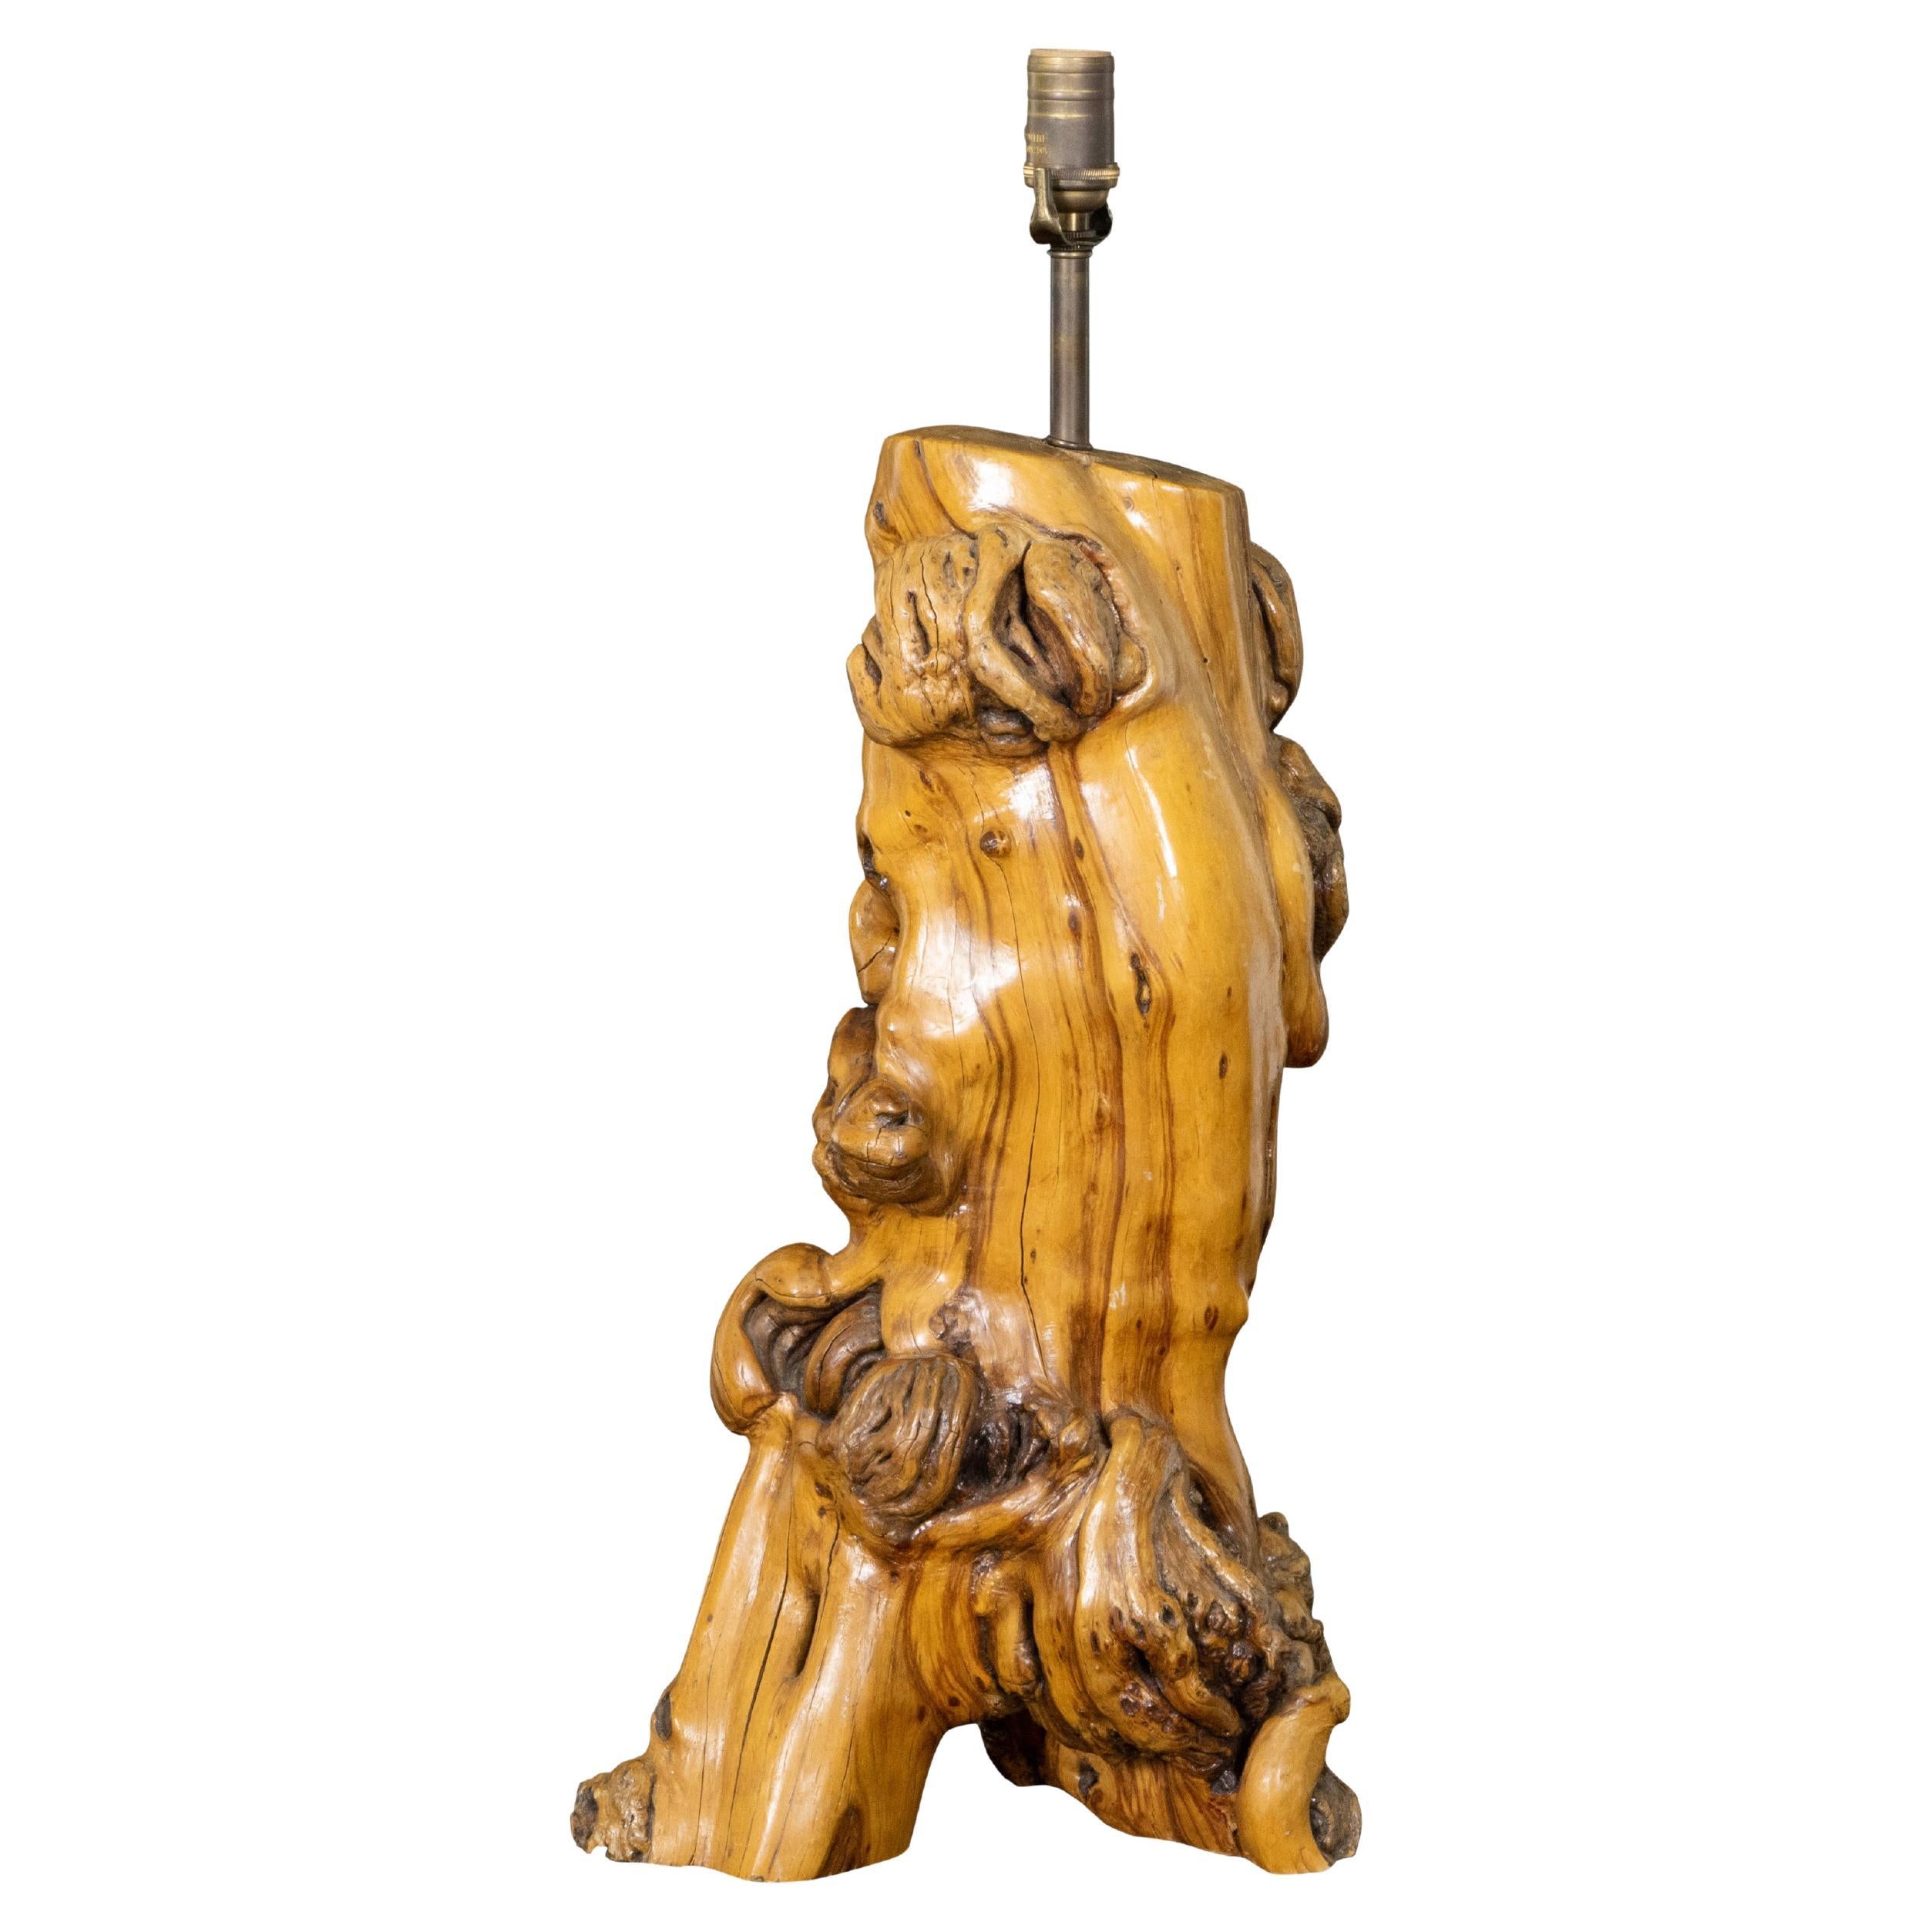 Rustic American Driftwood 1940s Burl Table Lamp with Single Light For Sale